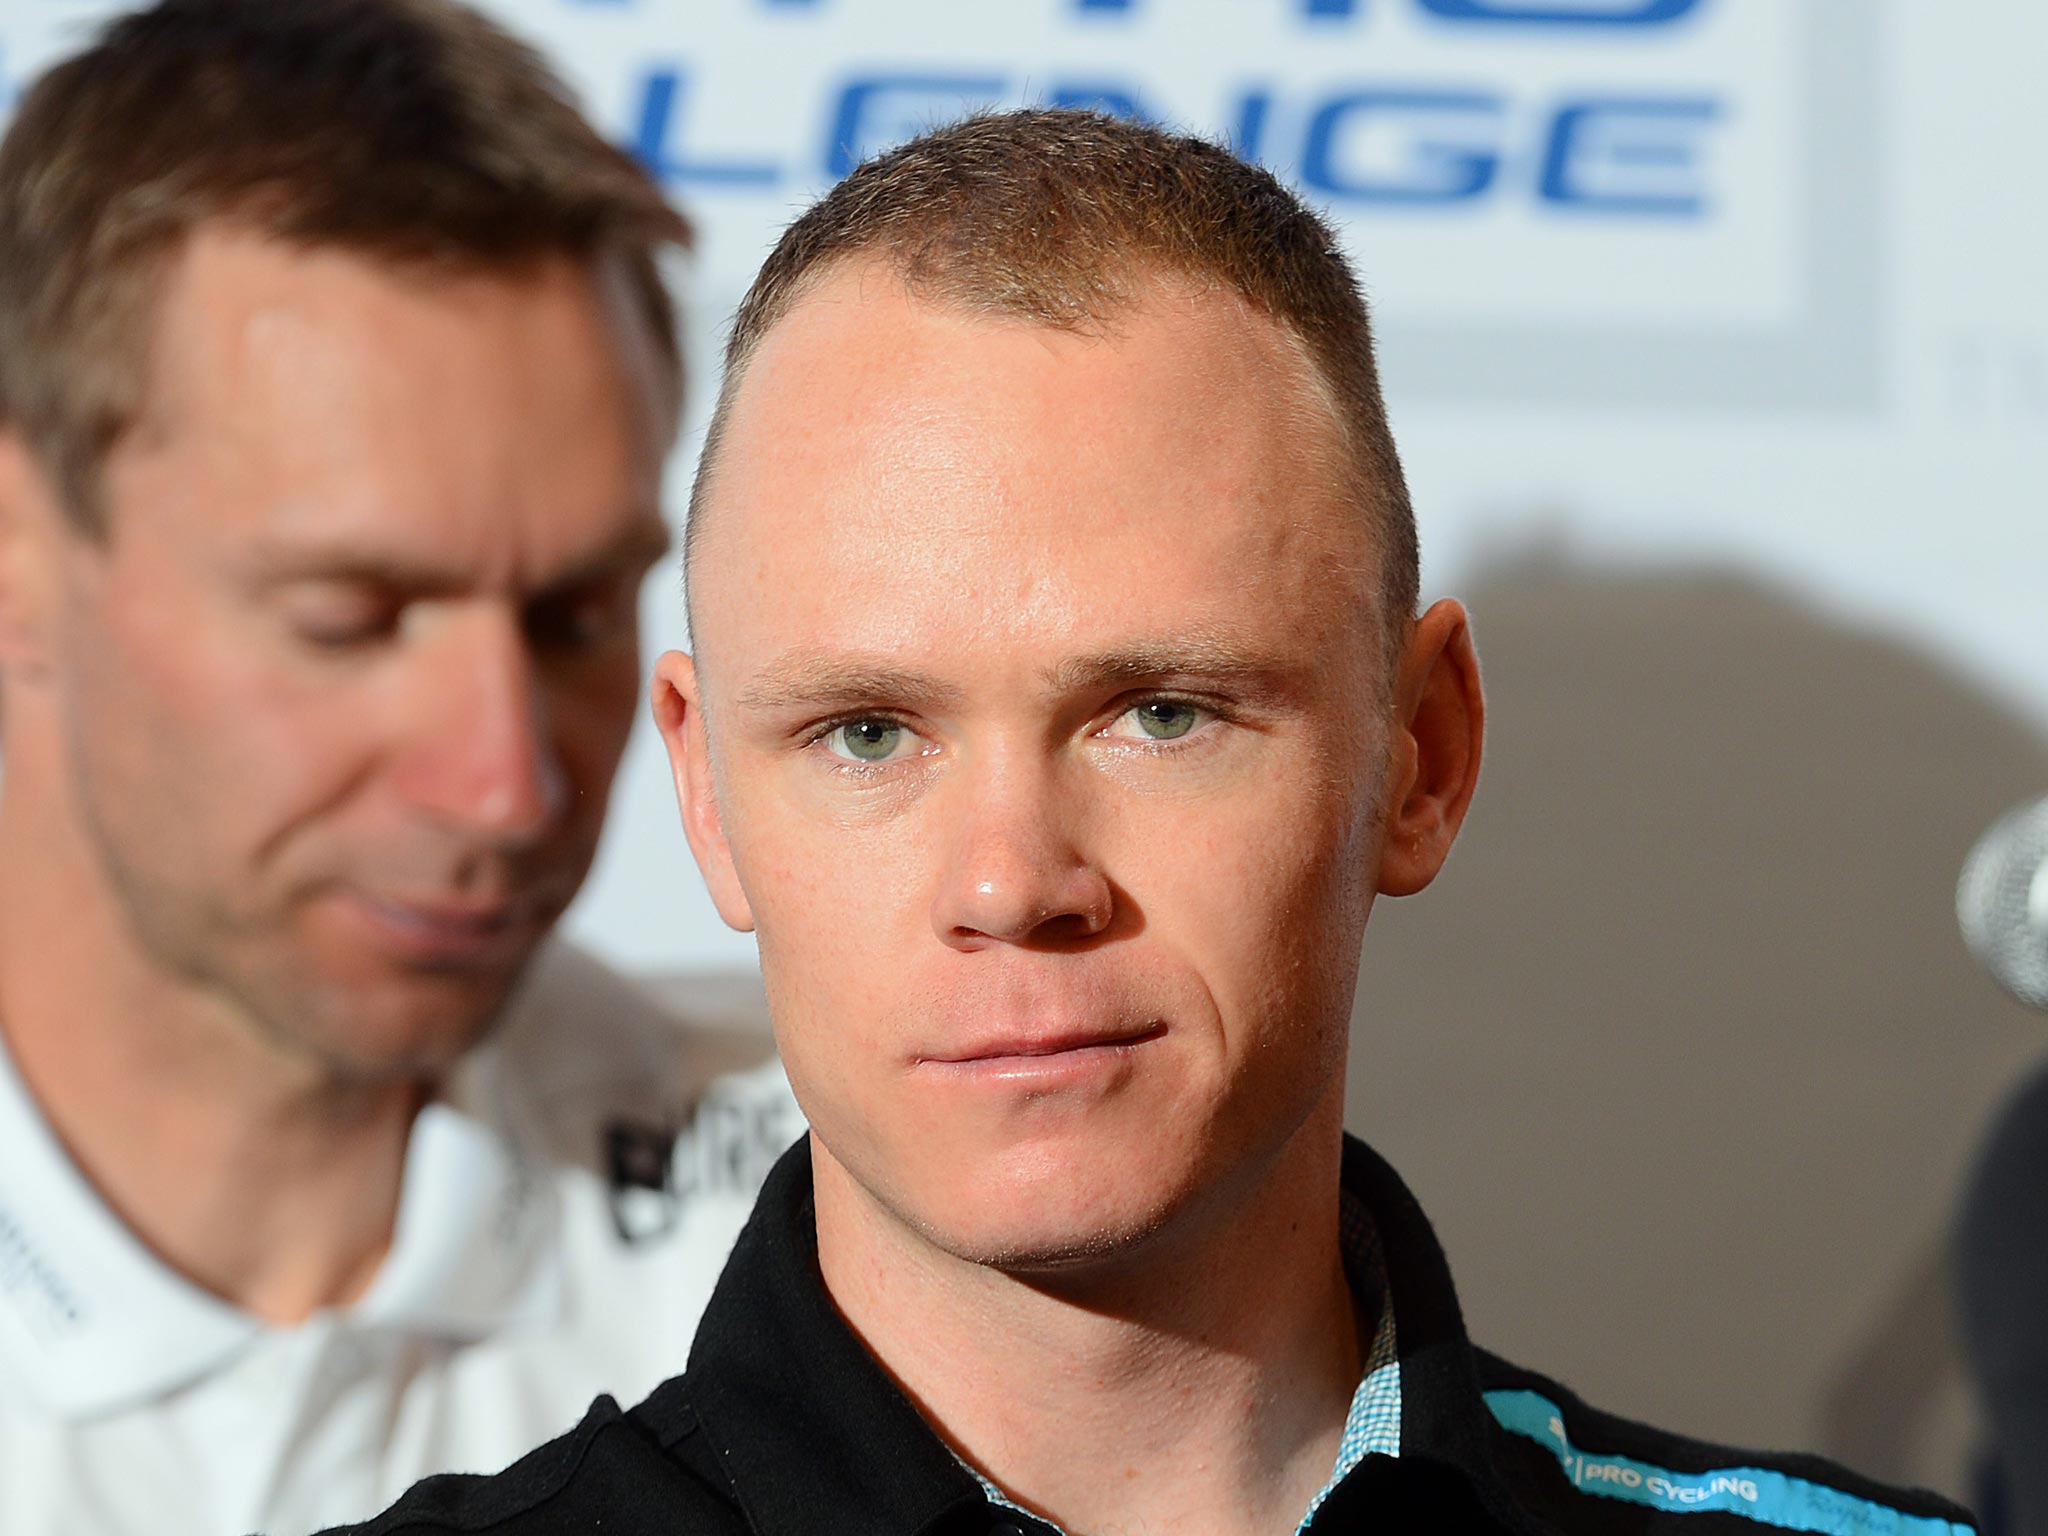 Tour winner Chris Froome said three top hopes for this year’s race have not been tested at a training camp